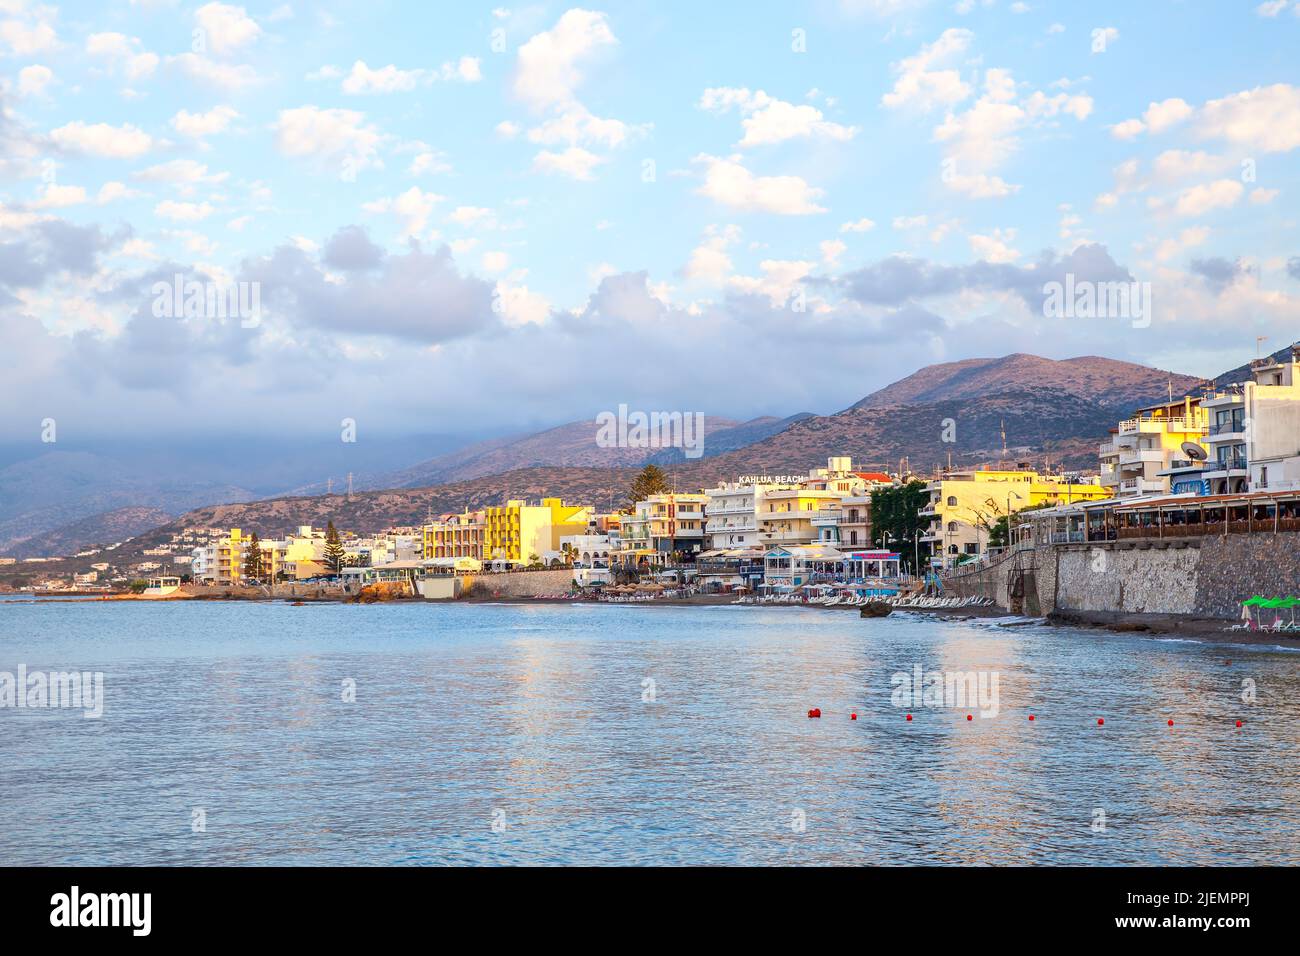 Limenas Chersonisou, Greece - July 1, 2015: View of Crete Island with waterfront in Limenas Chersonisou Stock Photo